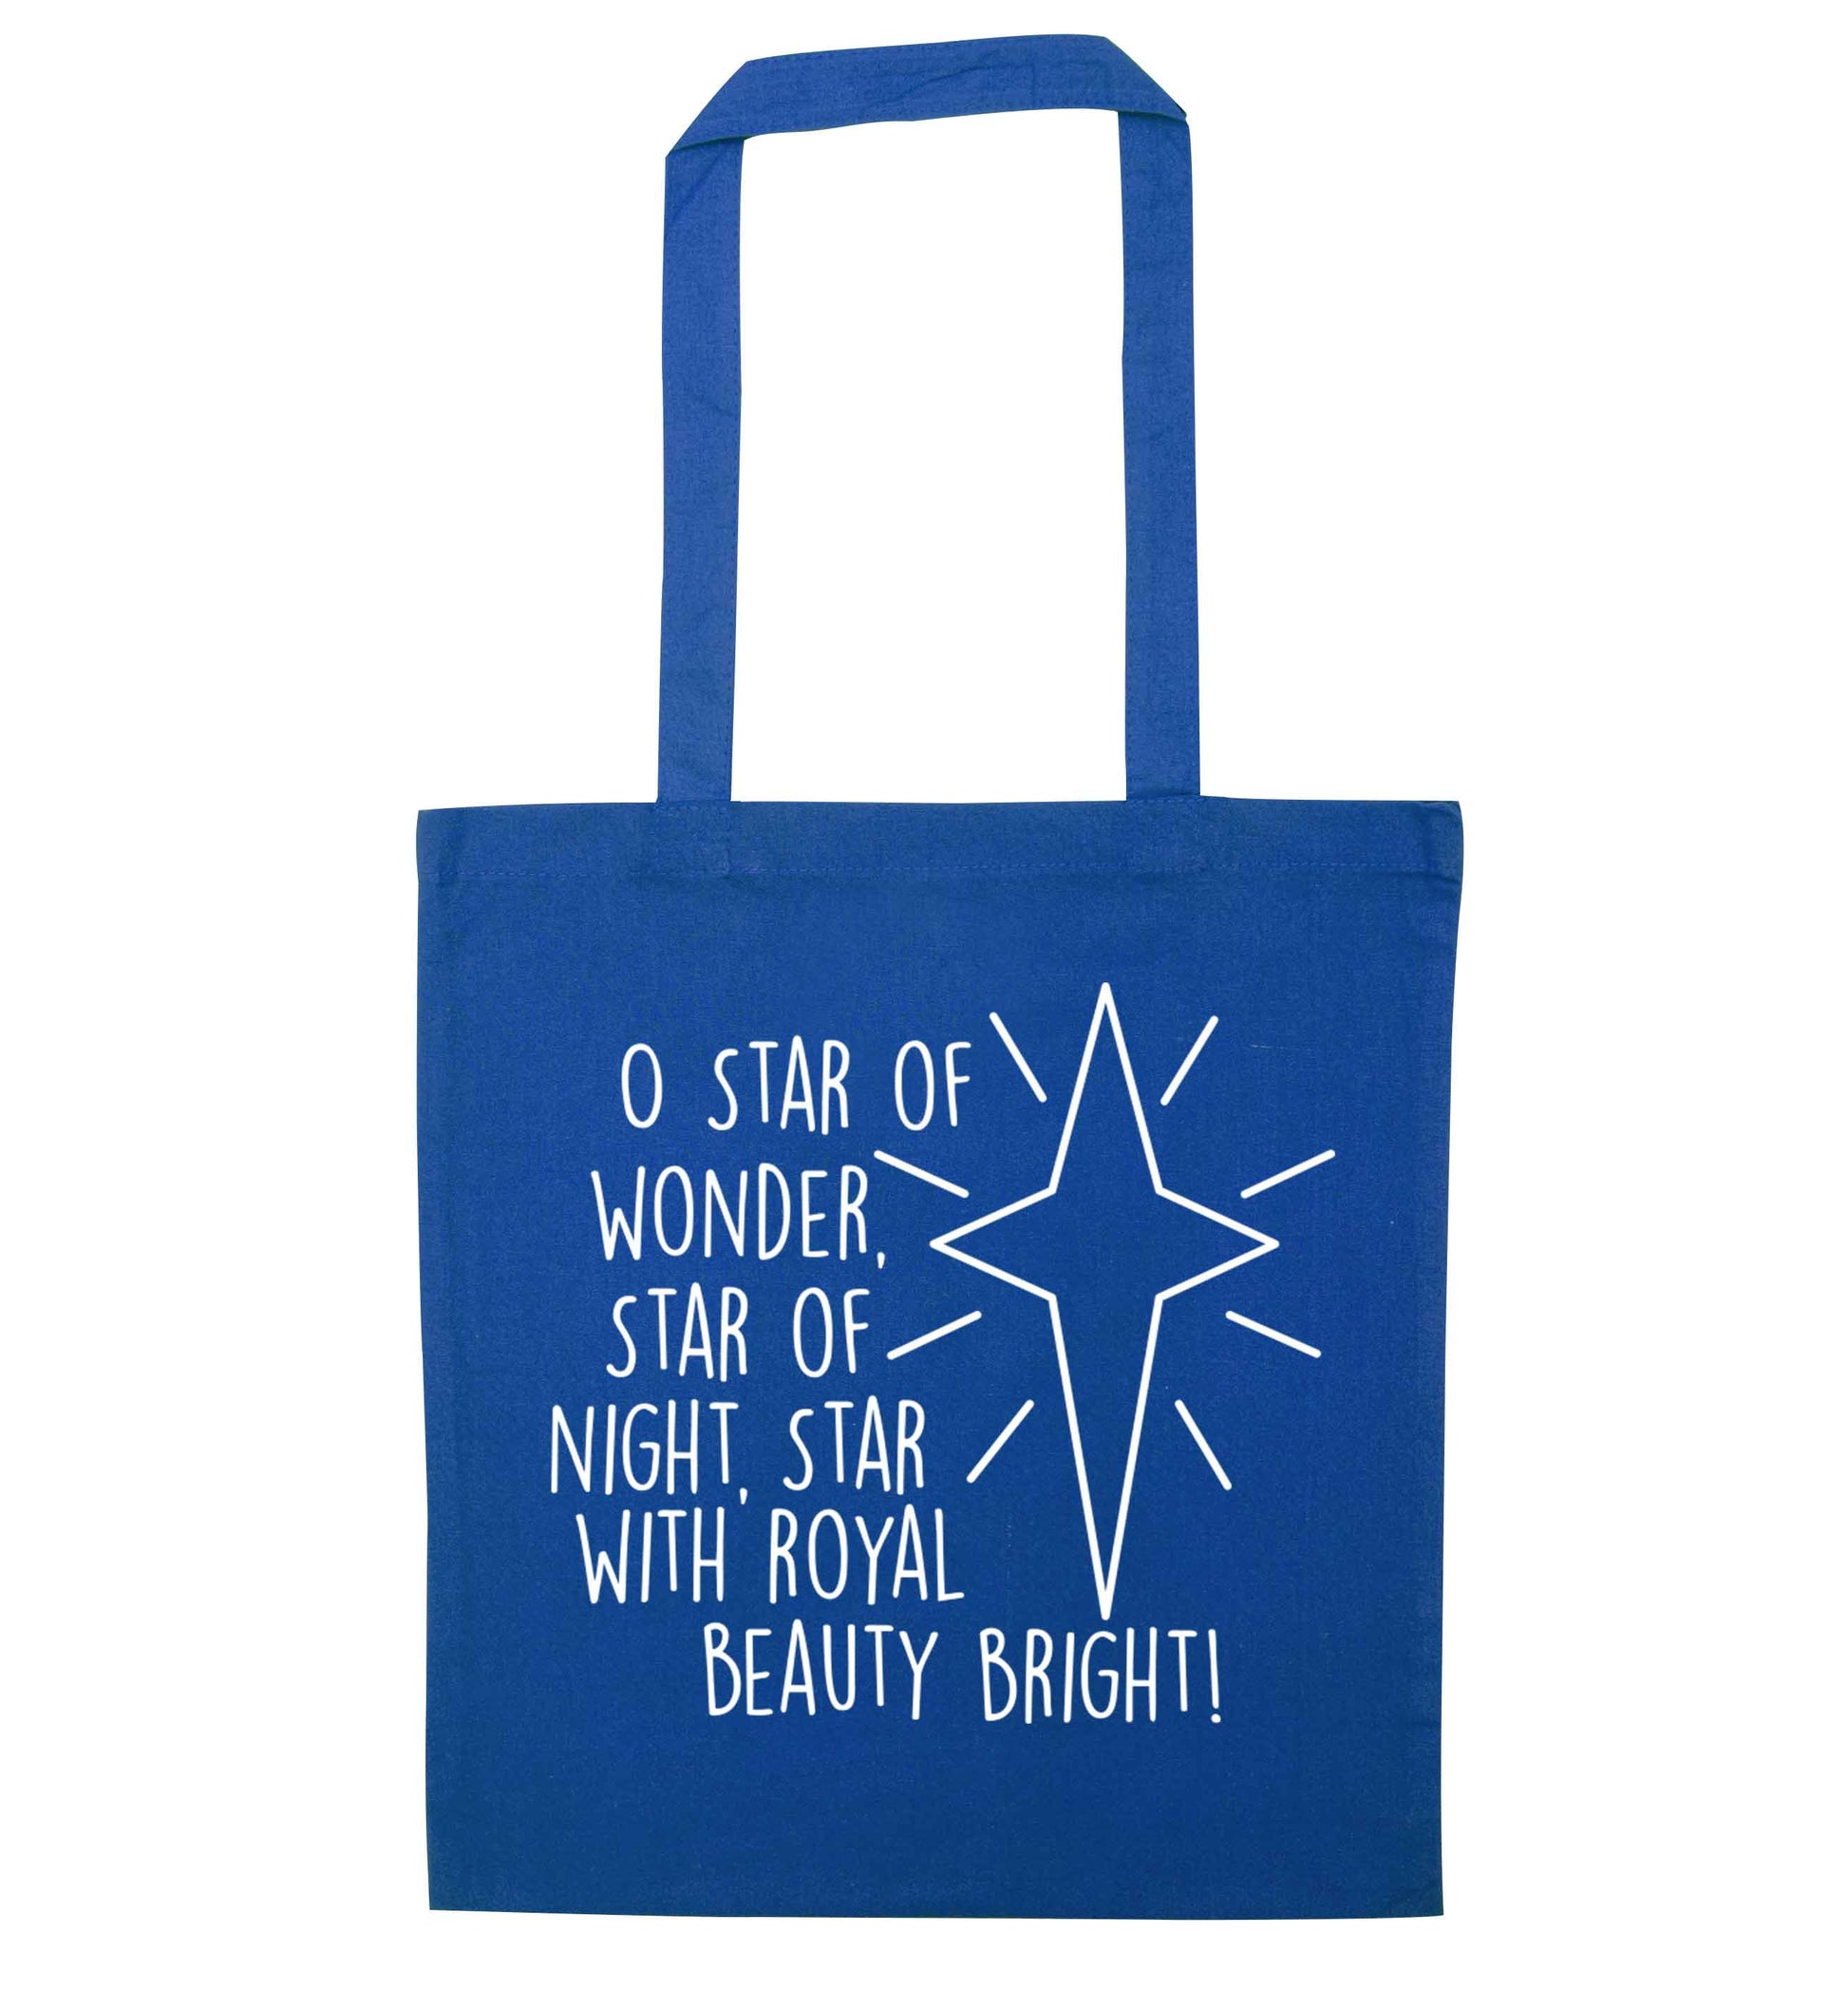 Oh star of wonder star of night, star with royal beauty bright blue tote bag